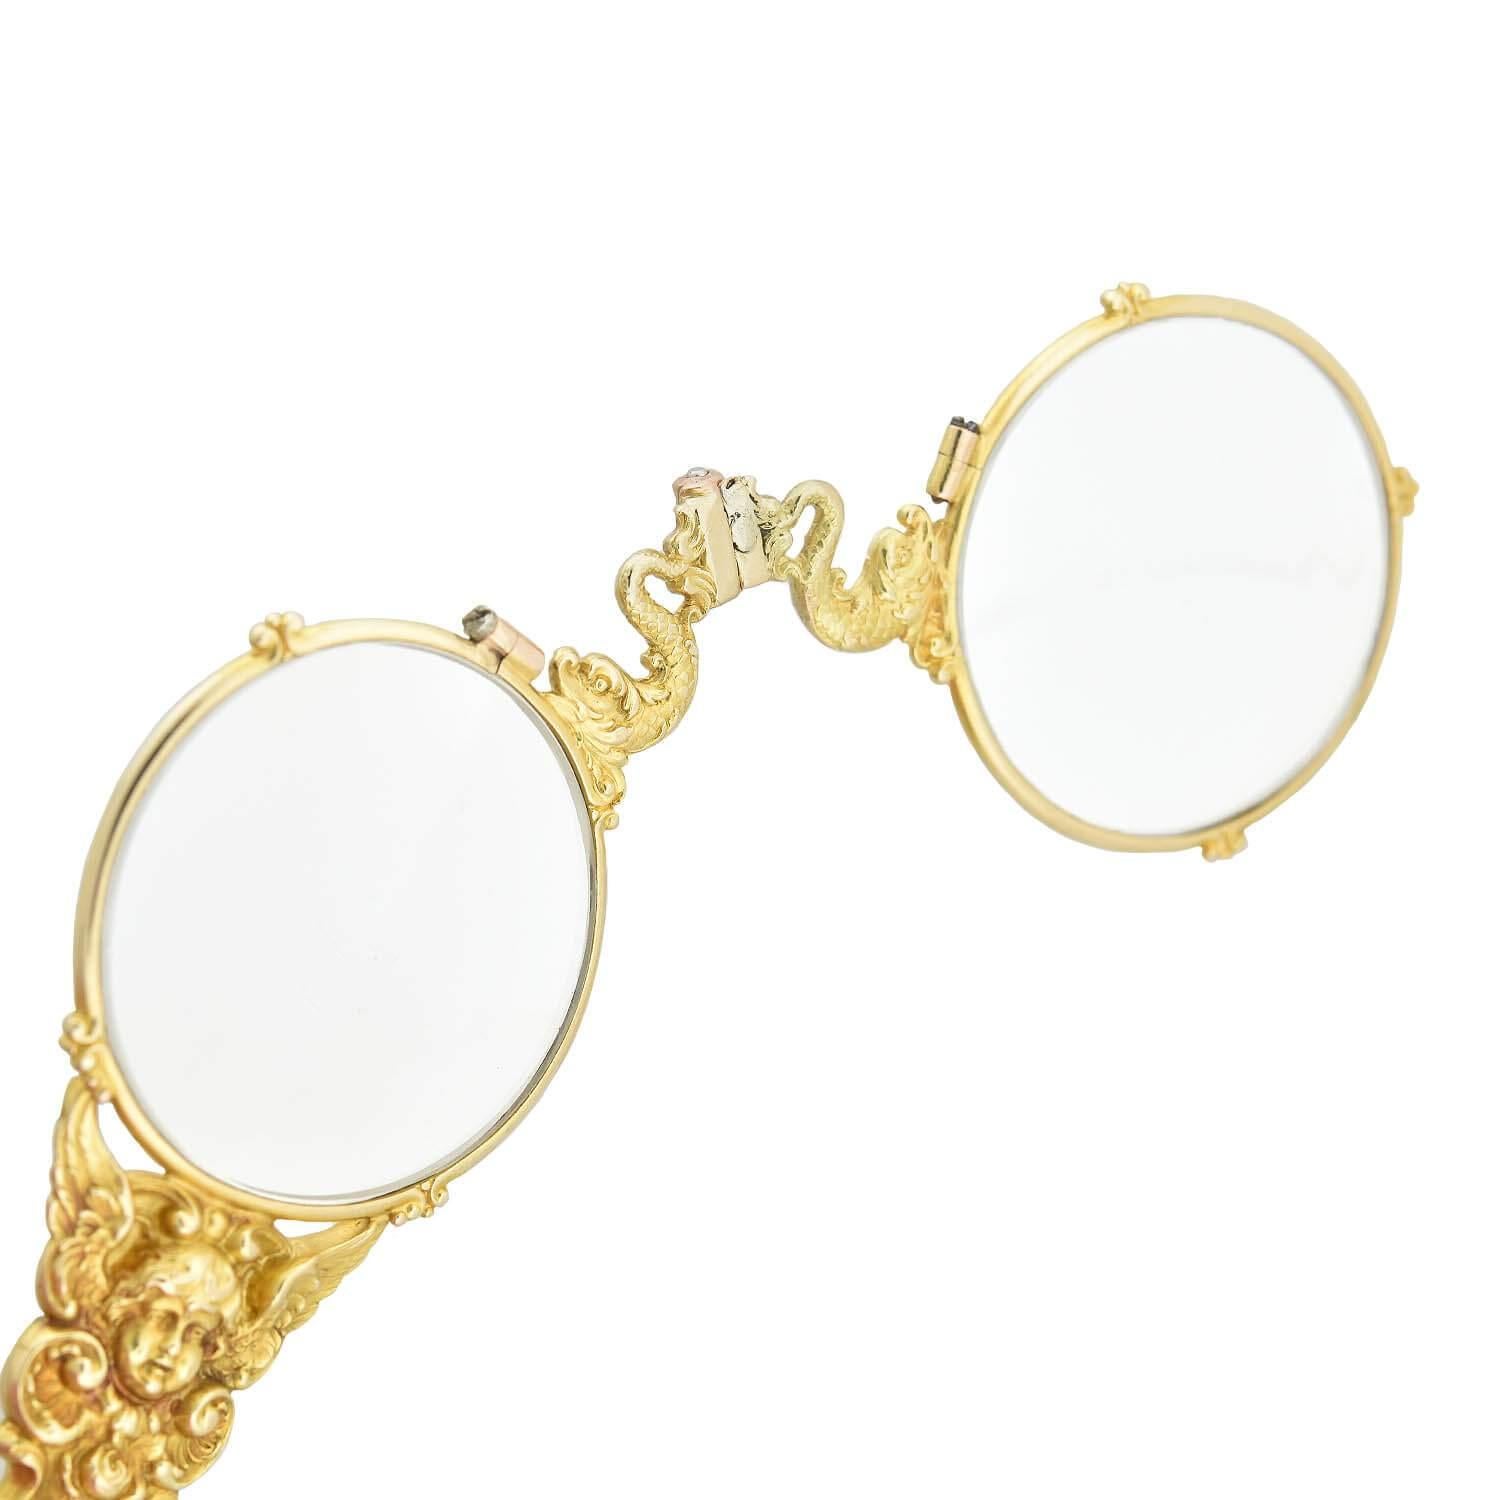 Art Nouveau 14kt Expandable Lorgnette Glasses In Fair Condition For Sale In Narberth, PA